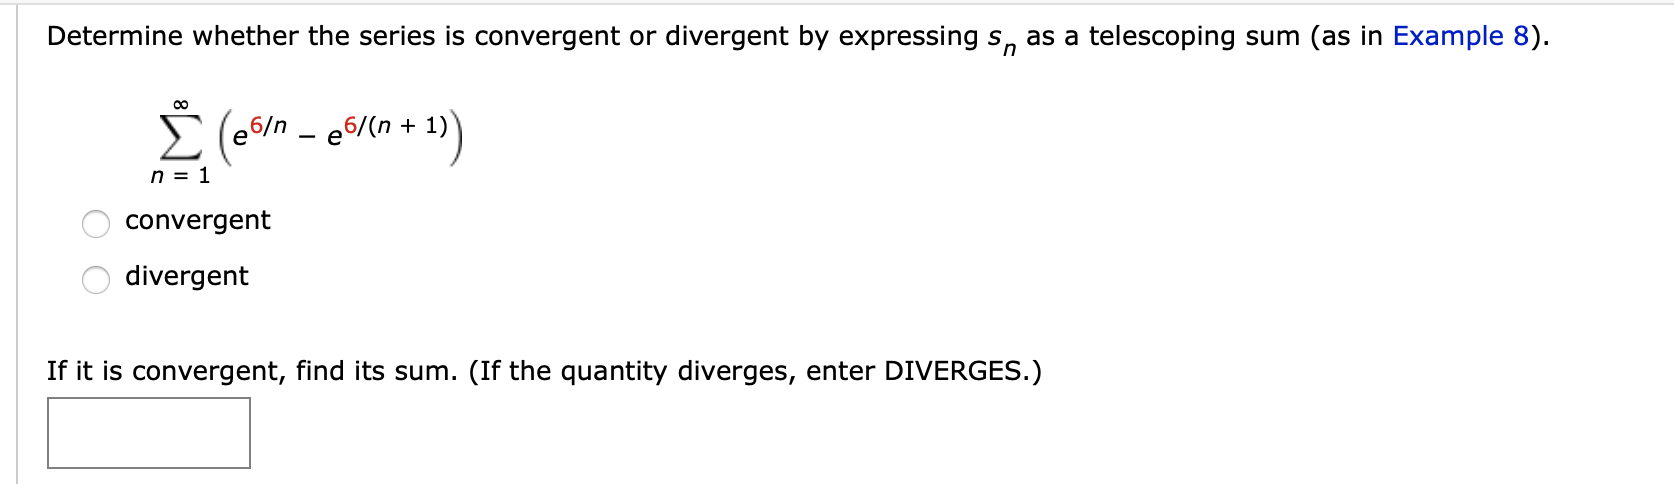 Determine whether the series is convergent or divergent by expressing s, as a telescoping sum (as in Example 8).
6/n - e6/(n + 1)
n = 1
convergent
divergent
If it is convergent, find its sum. (If the quantity diverges, enter DIVERGES.)
